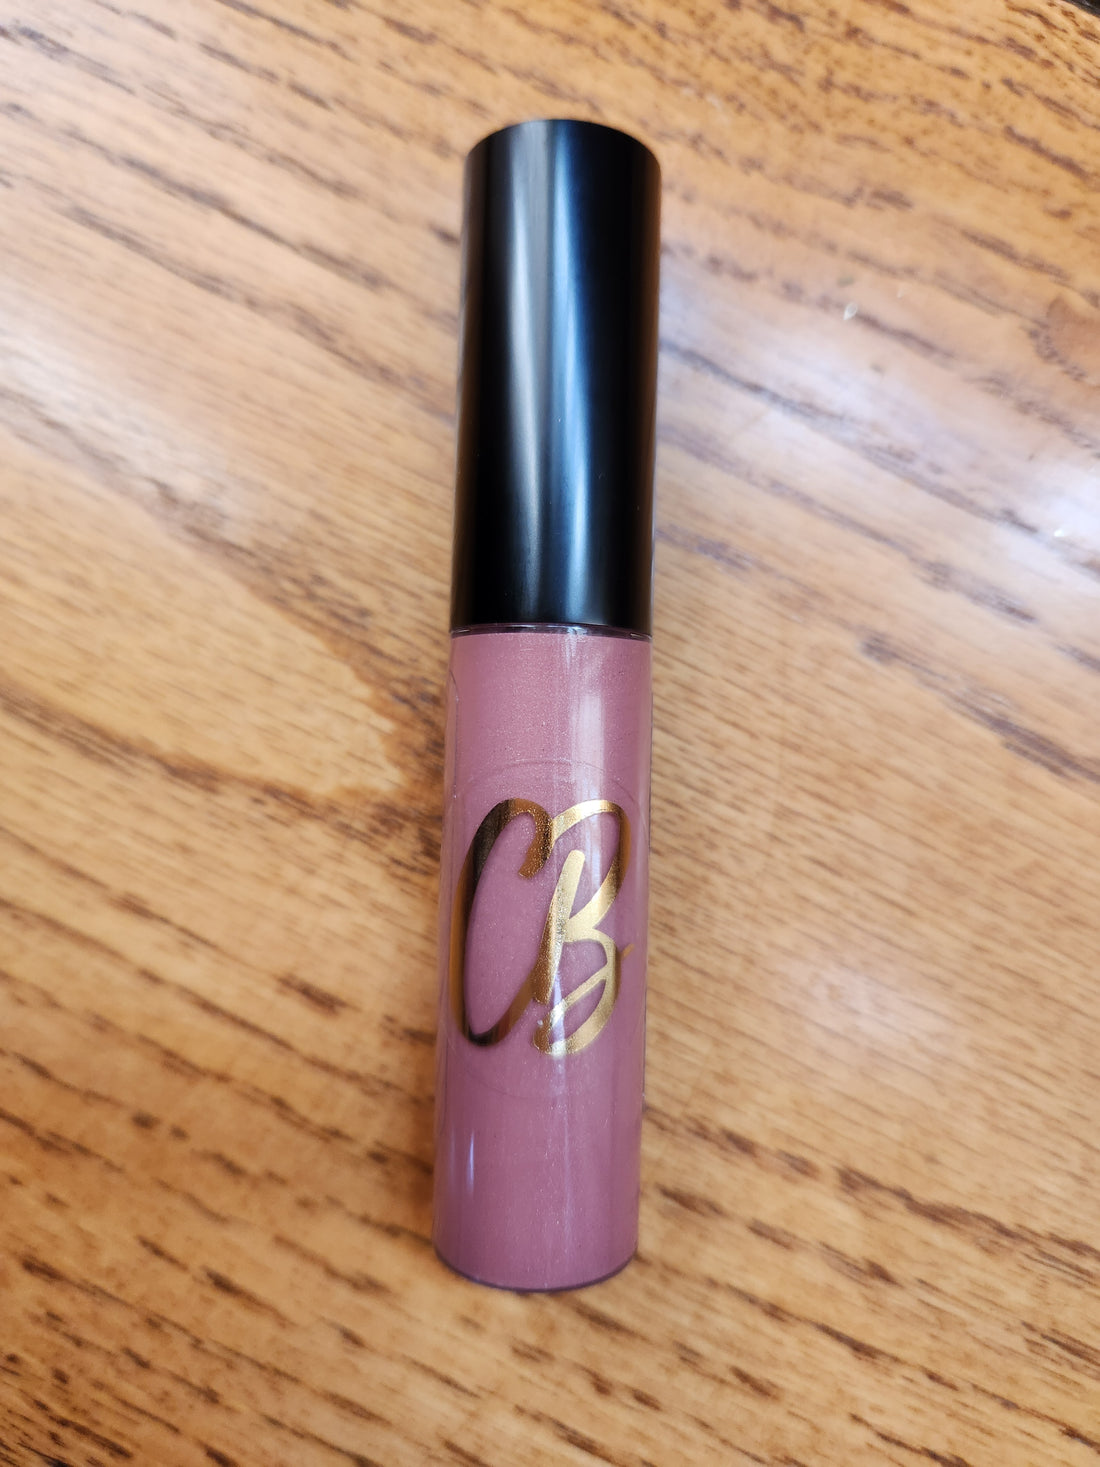 Limited-Edition Lip Gloss in Tea Rose